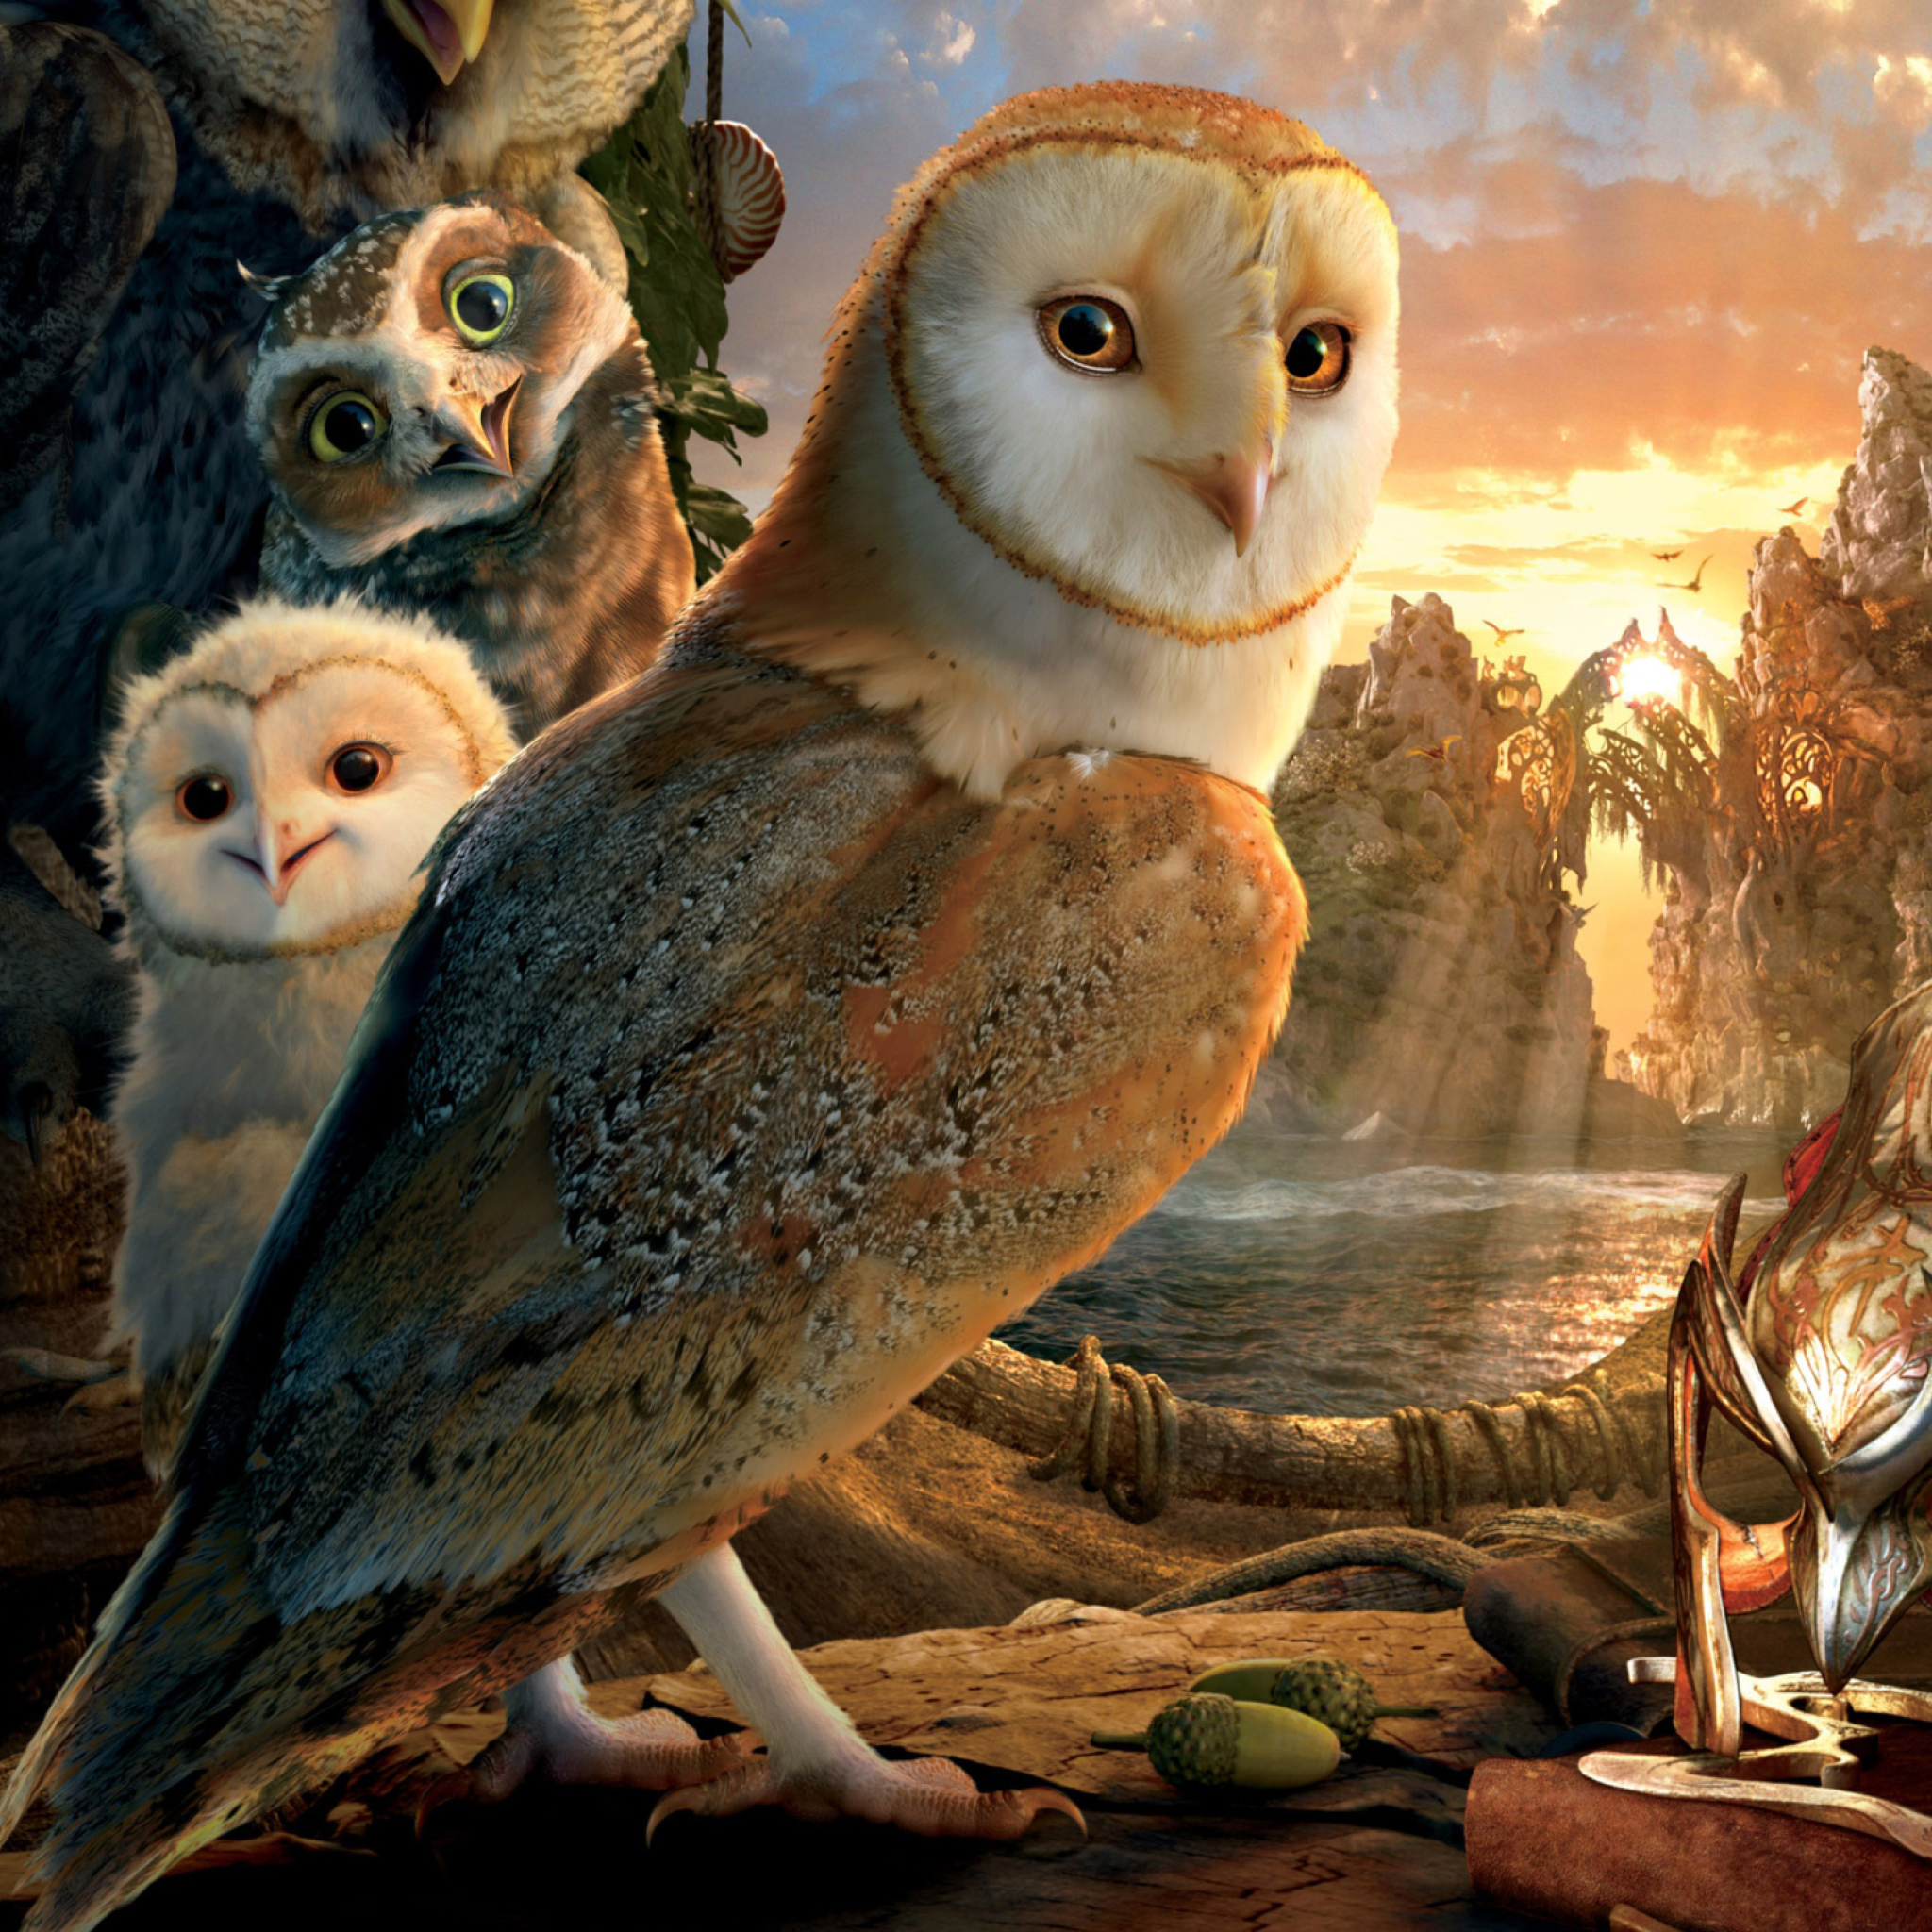 Legend Of The Guardians The Owls Of Ga Hoole wallpaper 2048x2048